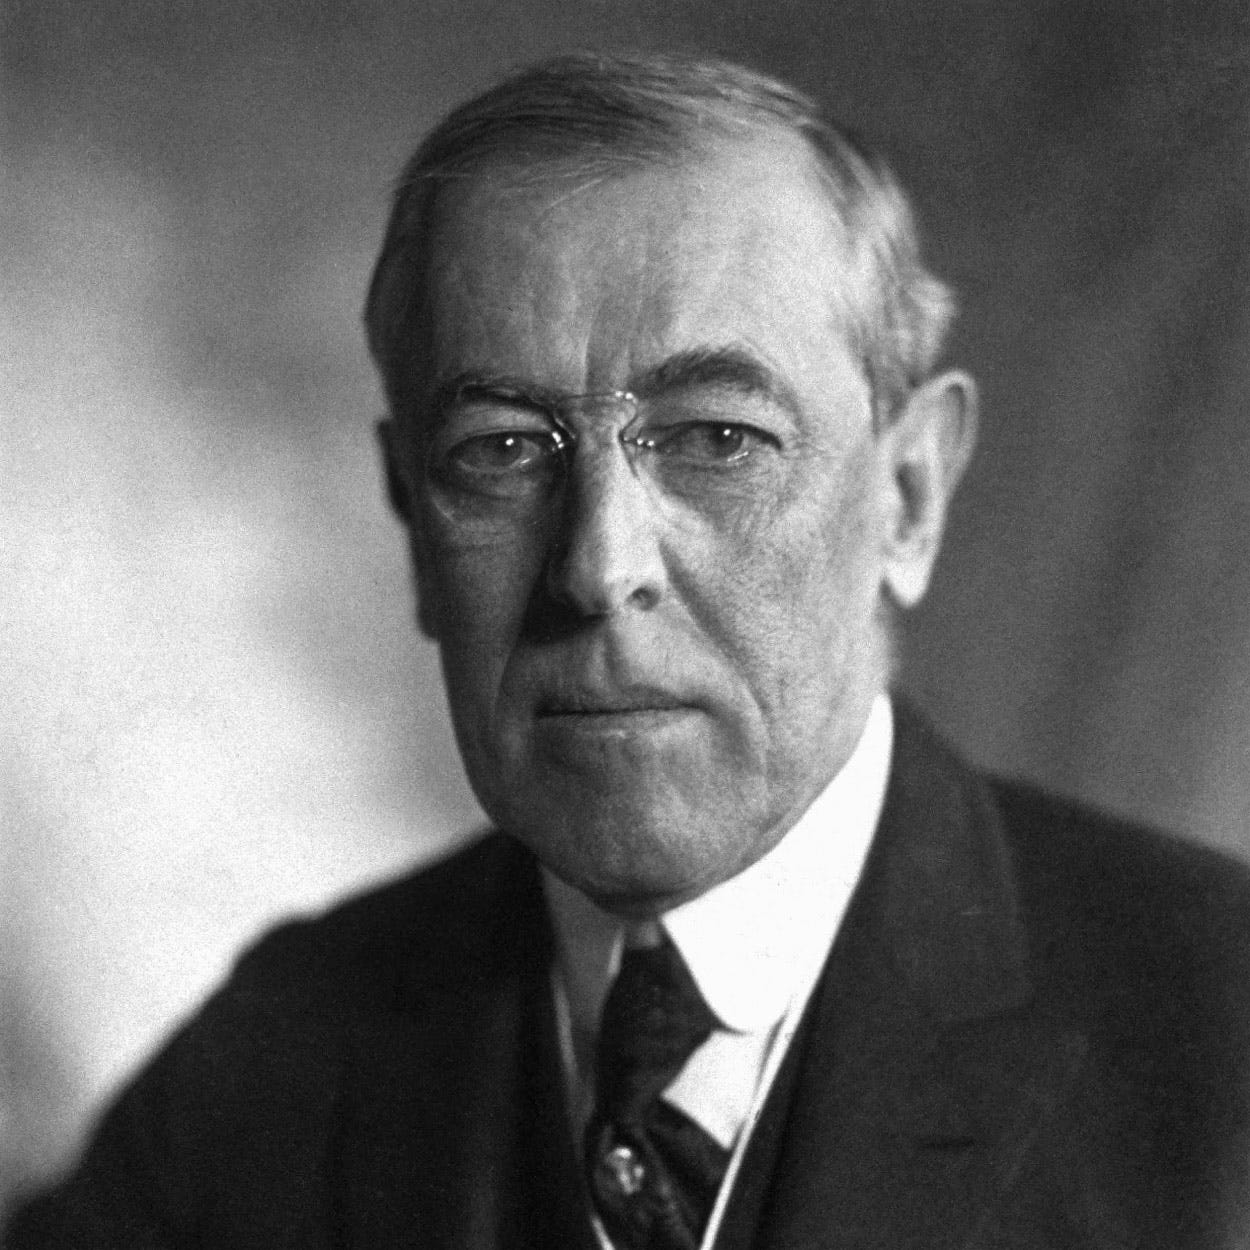 Portrait of Woodrow Wilson, the 28th President of the United States